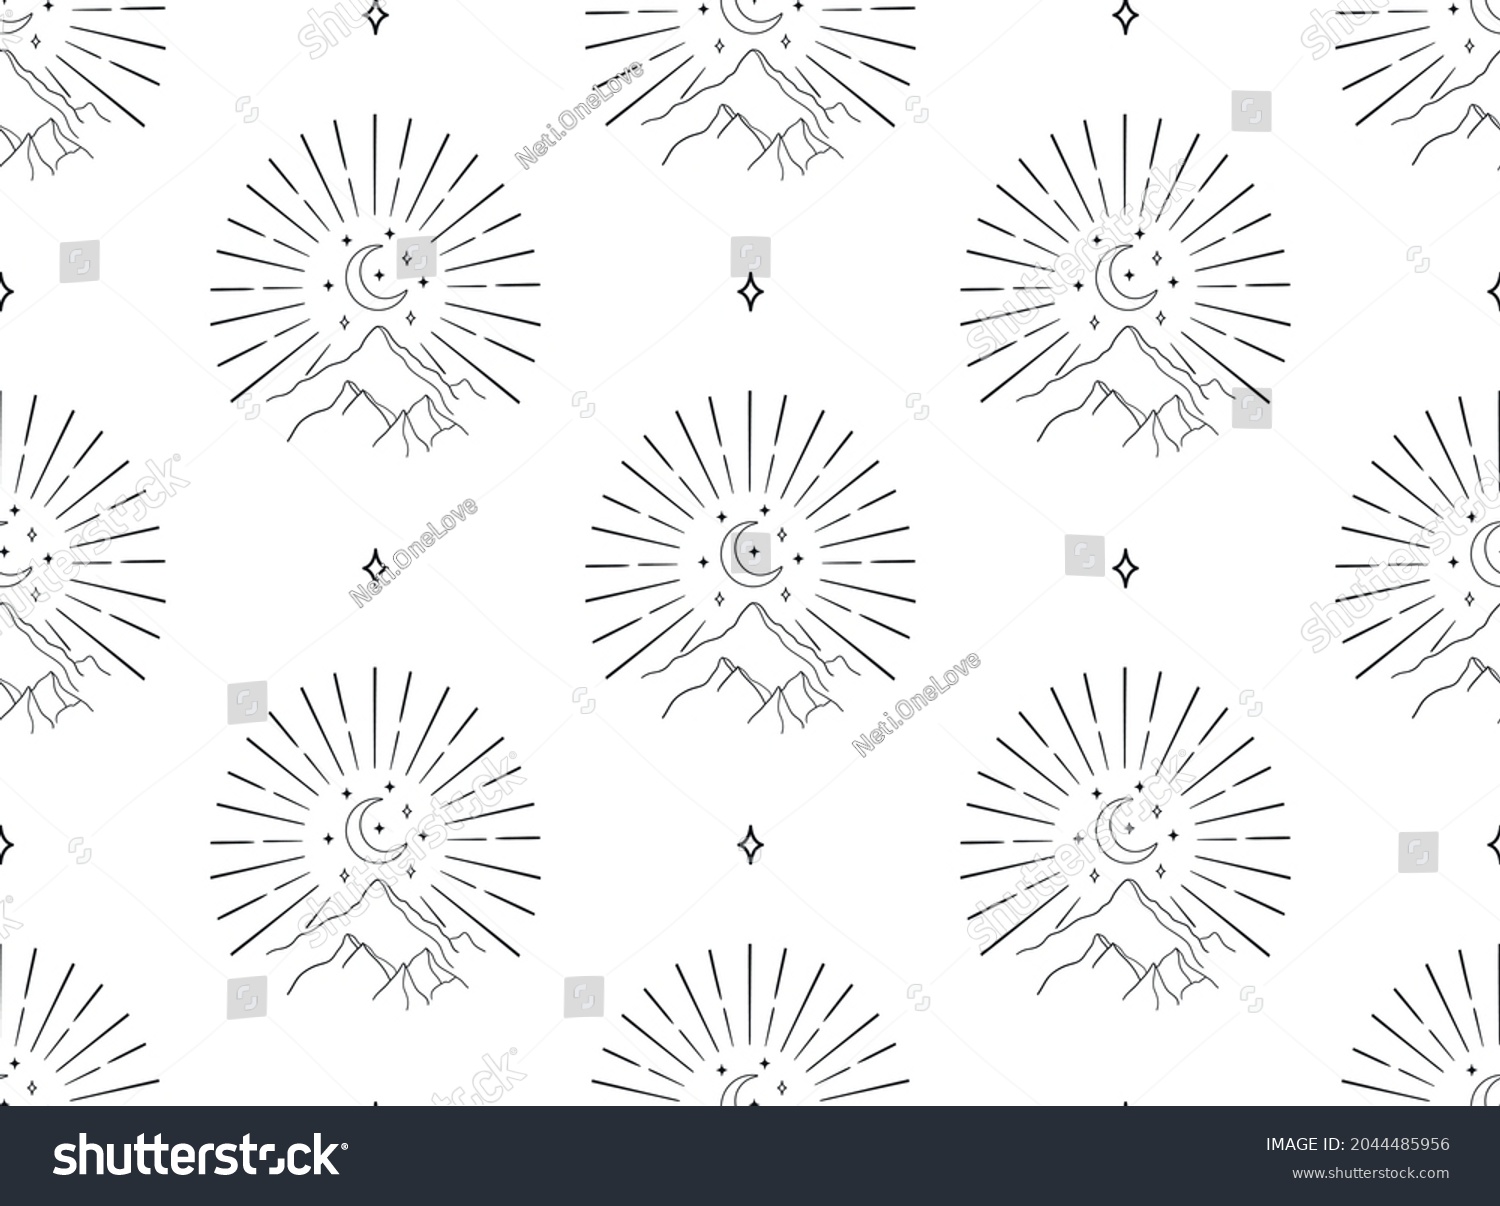 SVG of Abstract Background Seamless Pattern with Crescents, Stars, Suns, mountains, hills, rays. Mystic Design, Vector Illustration for wrapping tissue paper svg